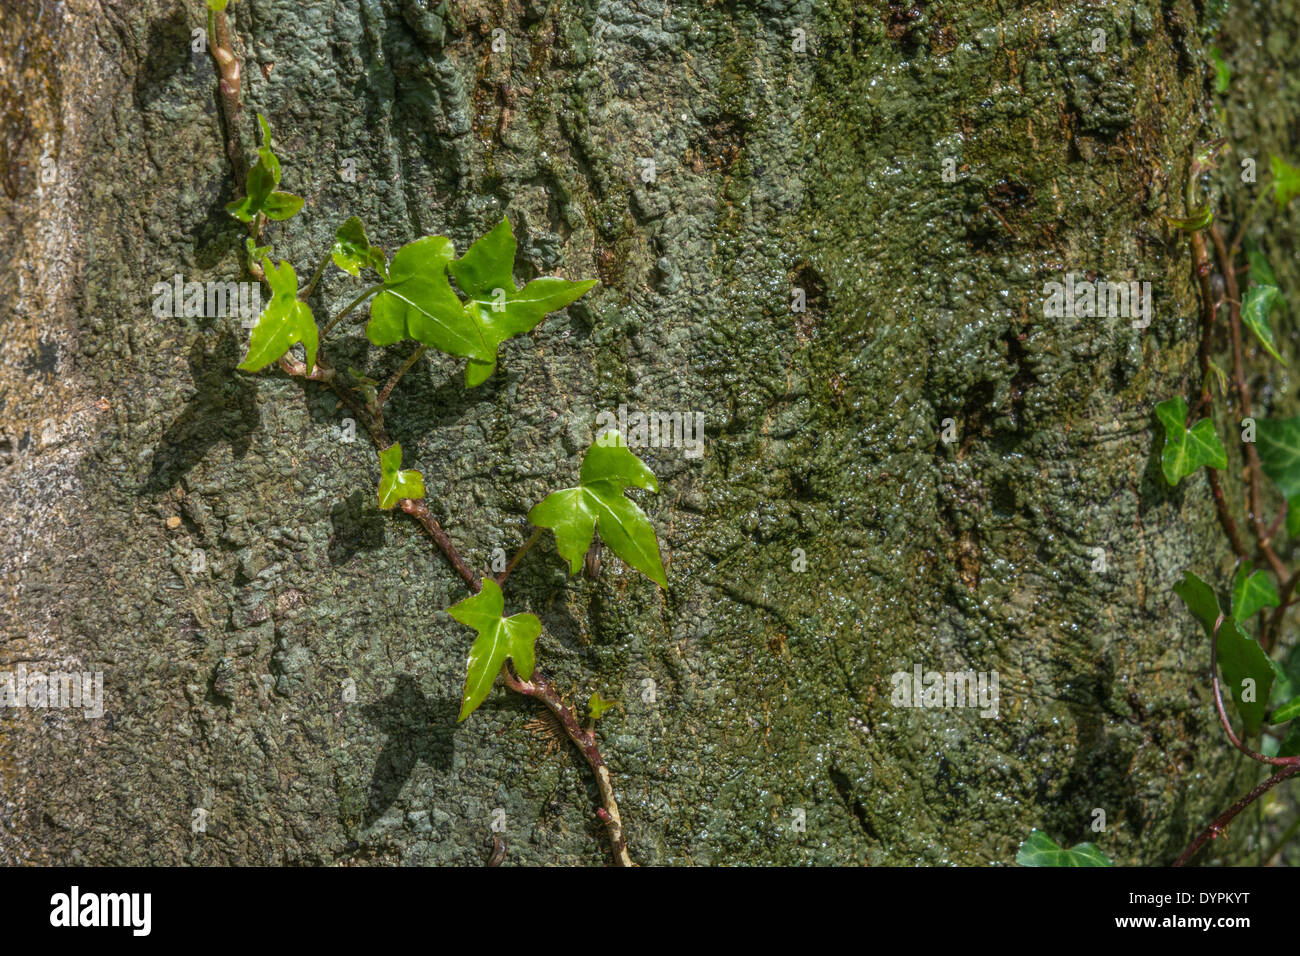 Common Ivy / Hedera helix growing on tree trunk surface. Hedera helix hanging, climbing plants, creeping ivy. Ivy plant on tree. Stock Photo